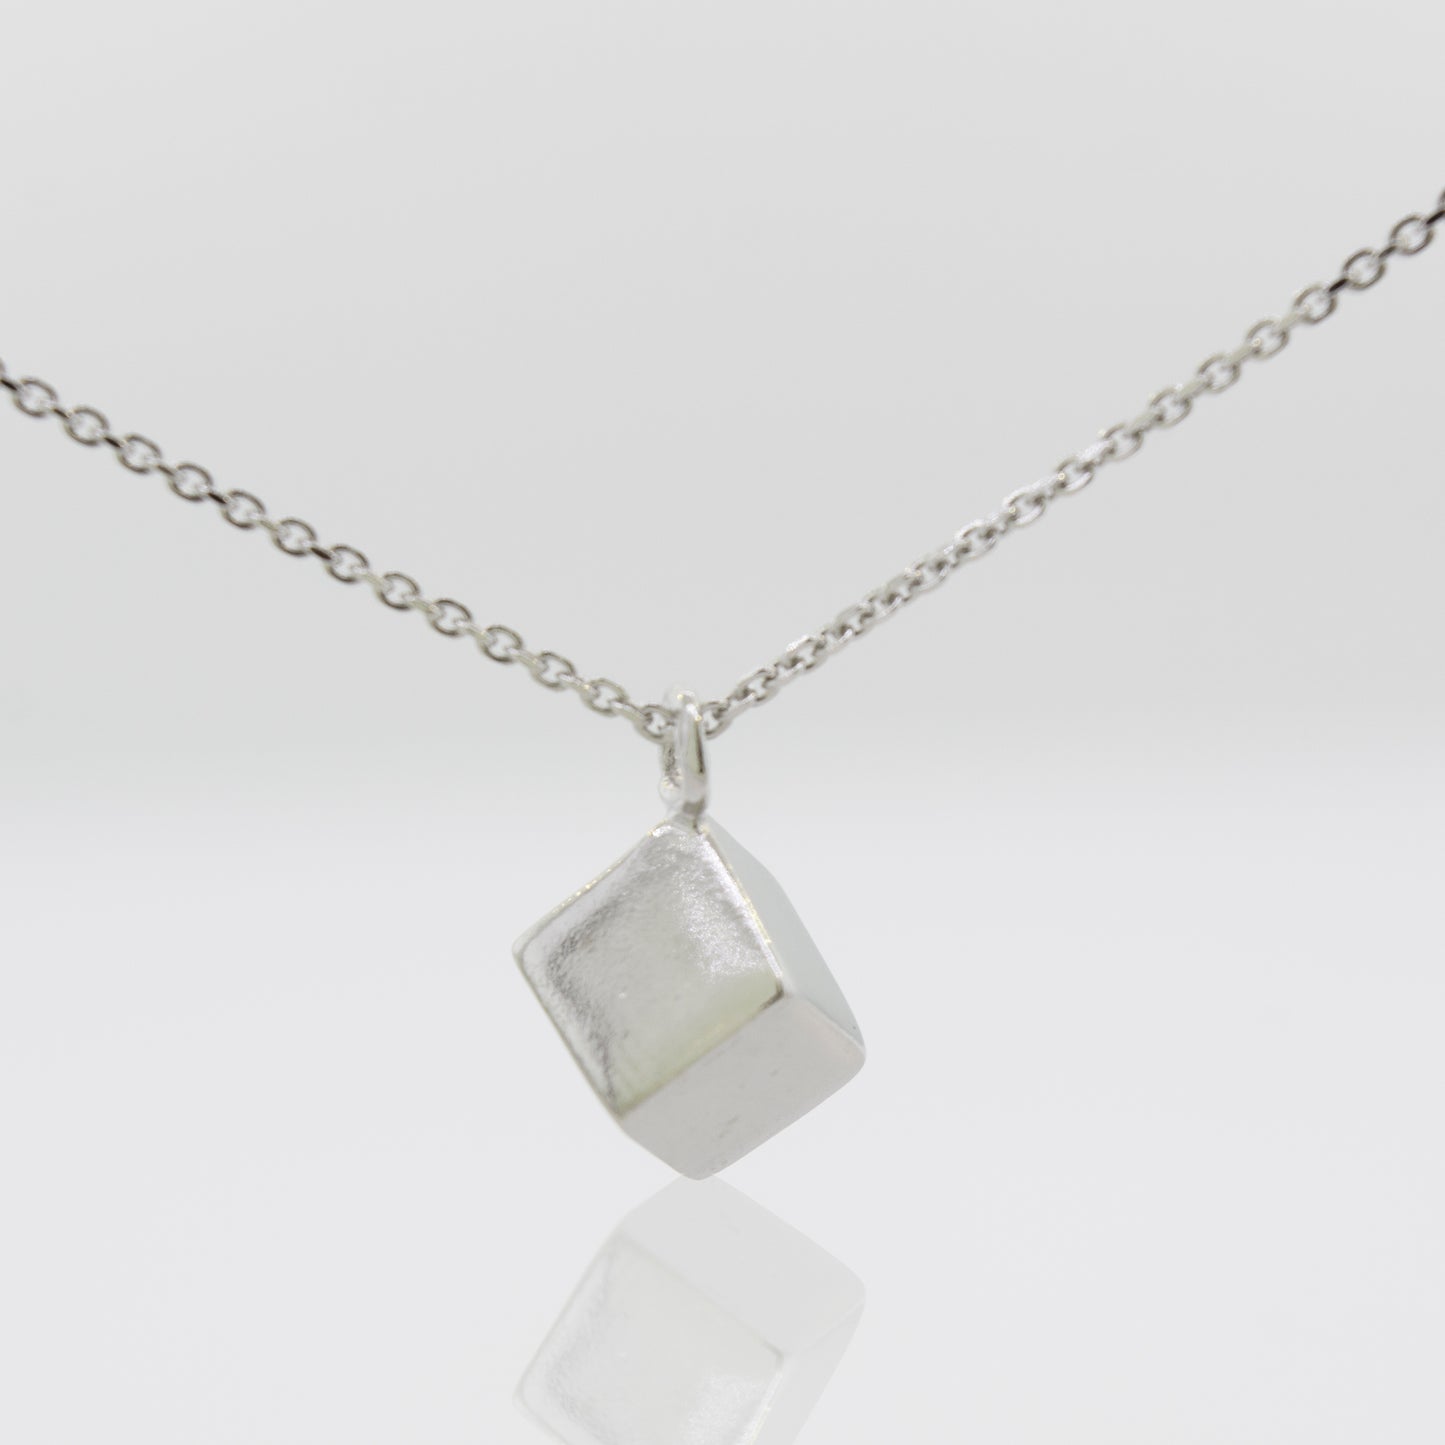 A Super Silver Sleek Three Dimensional Silver Cube Necklace with a cube pendant.